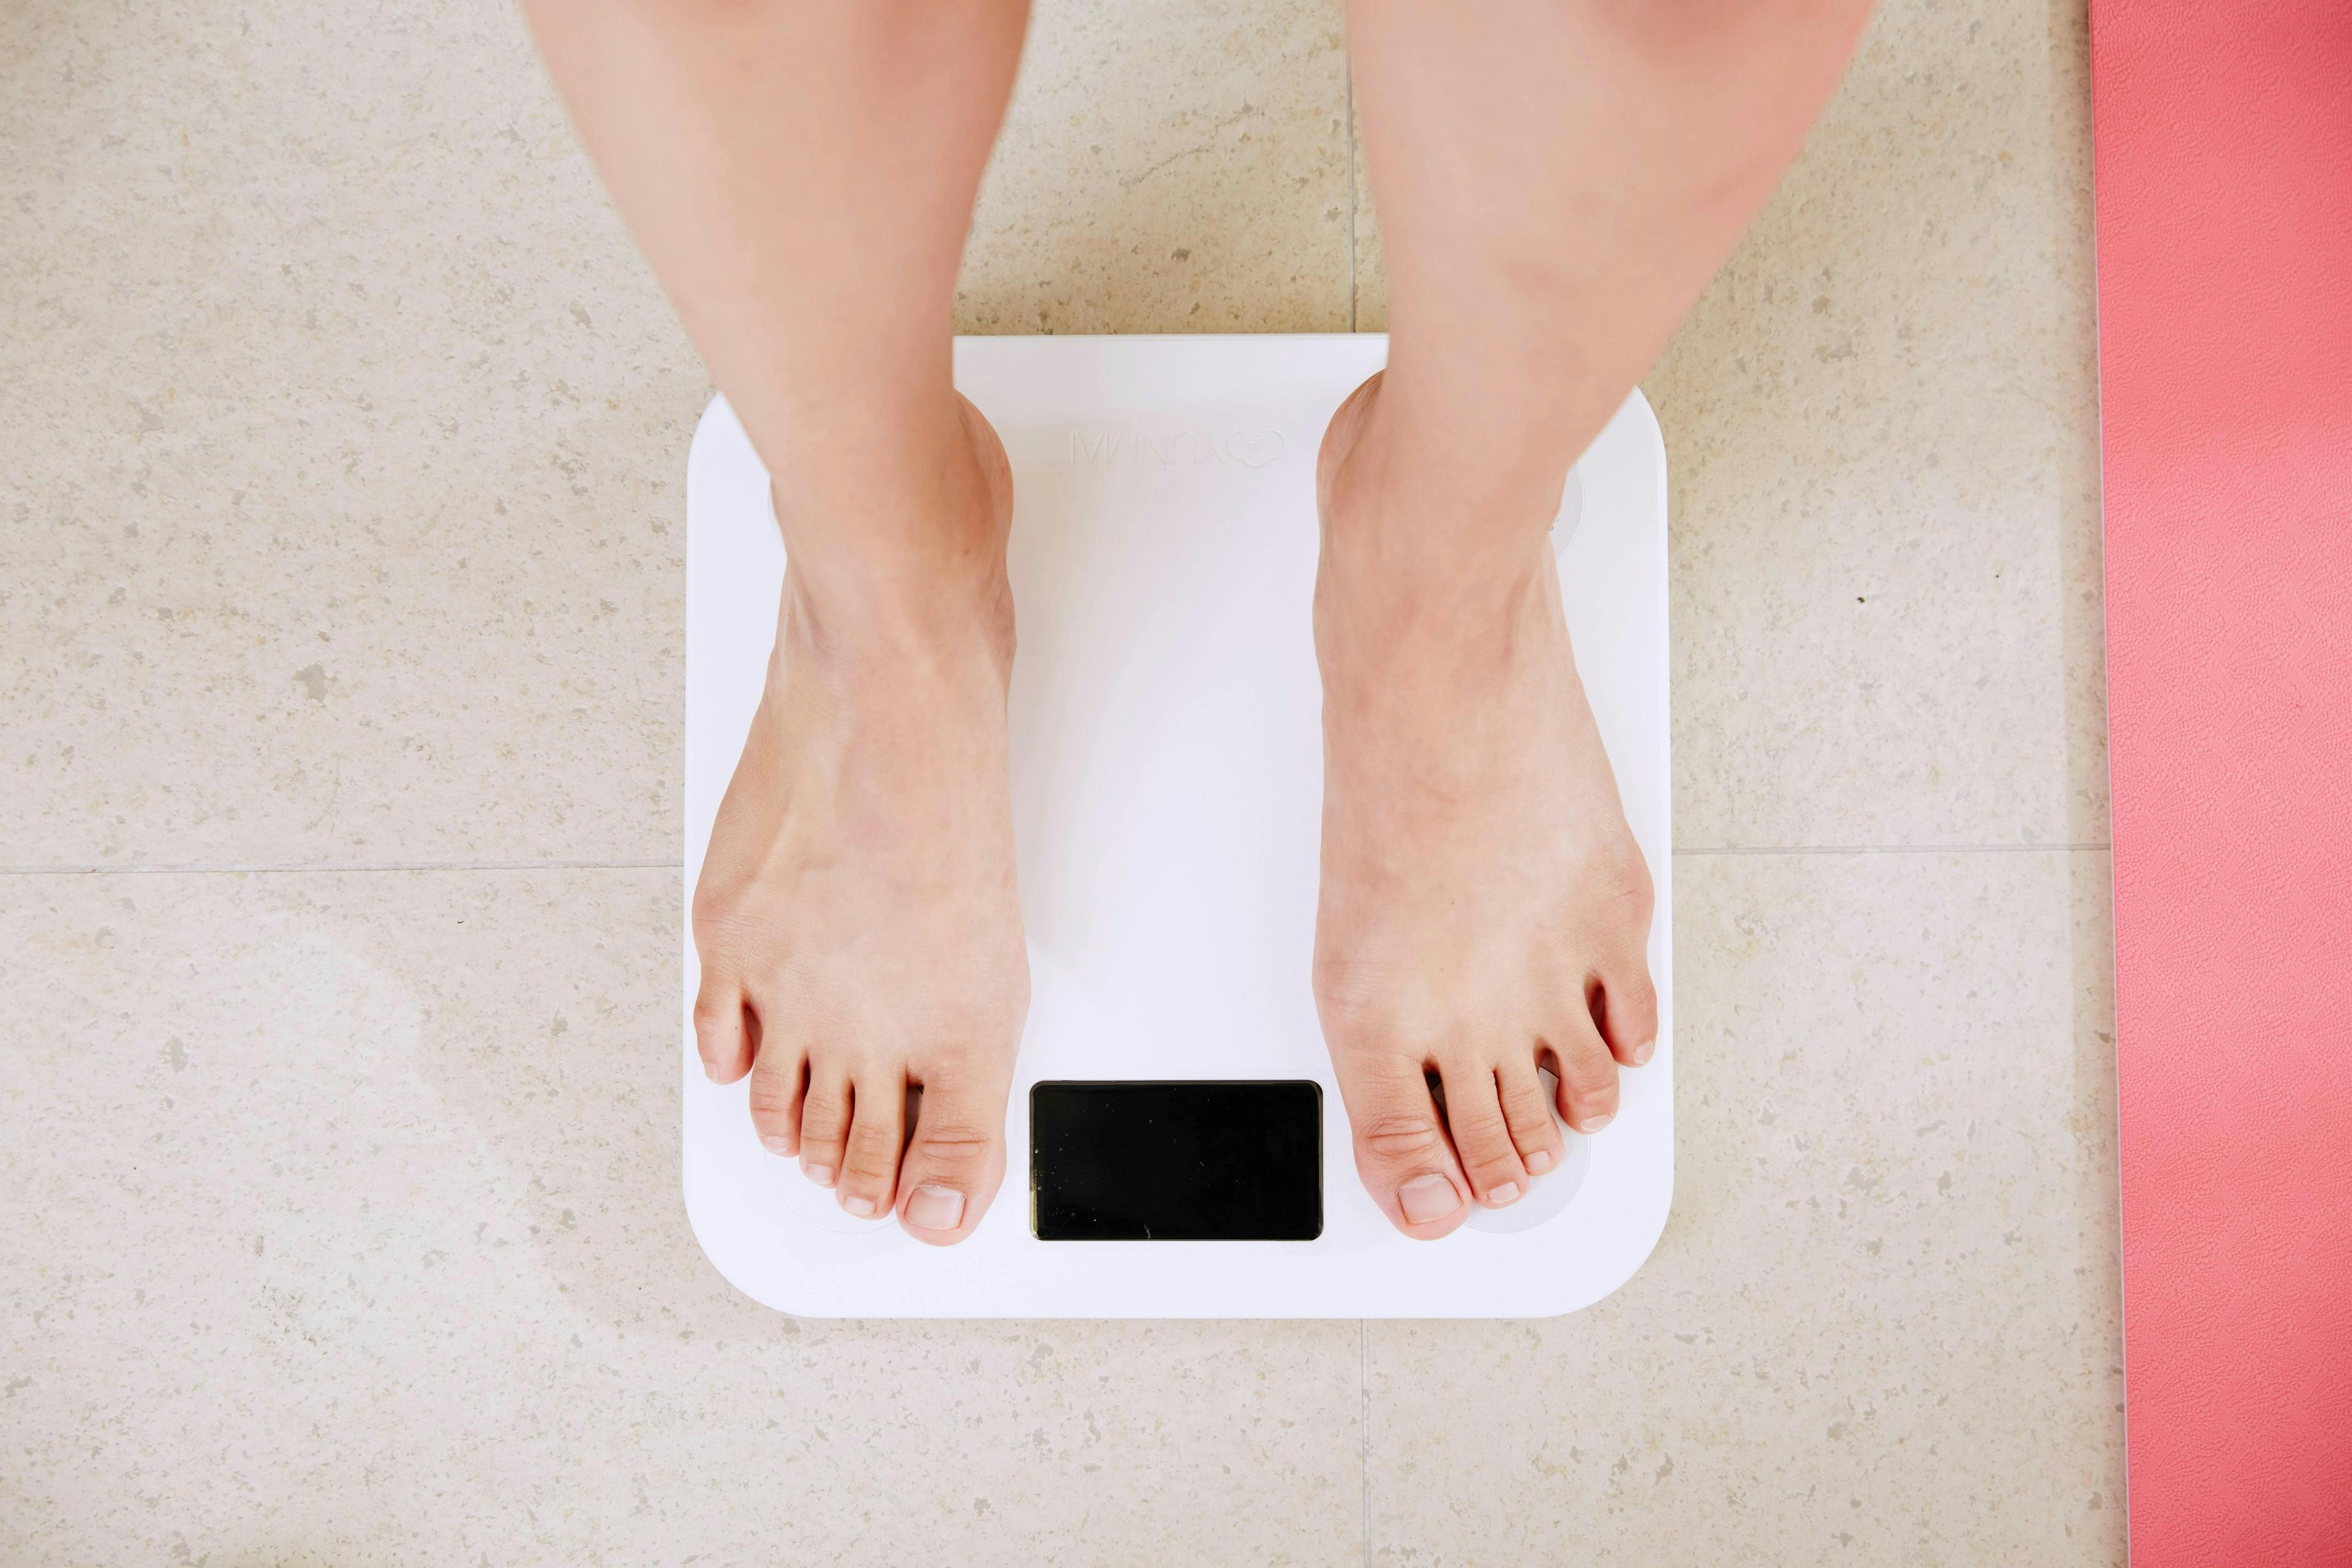 Feet standing on a white digital scale, with a pink yoga mat nearby, on a tiled floor.